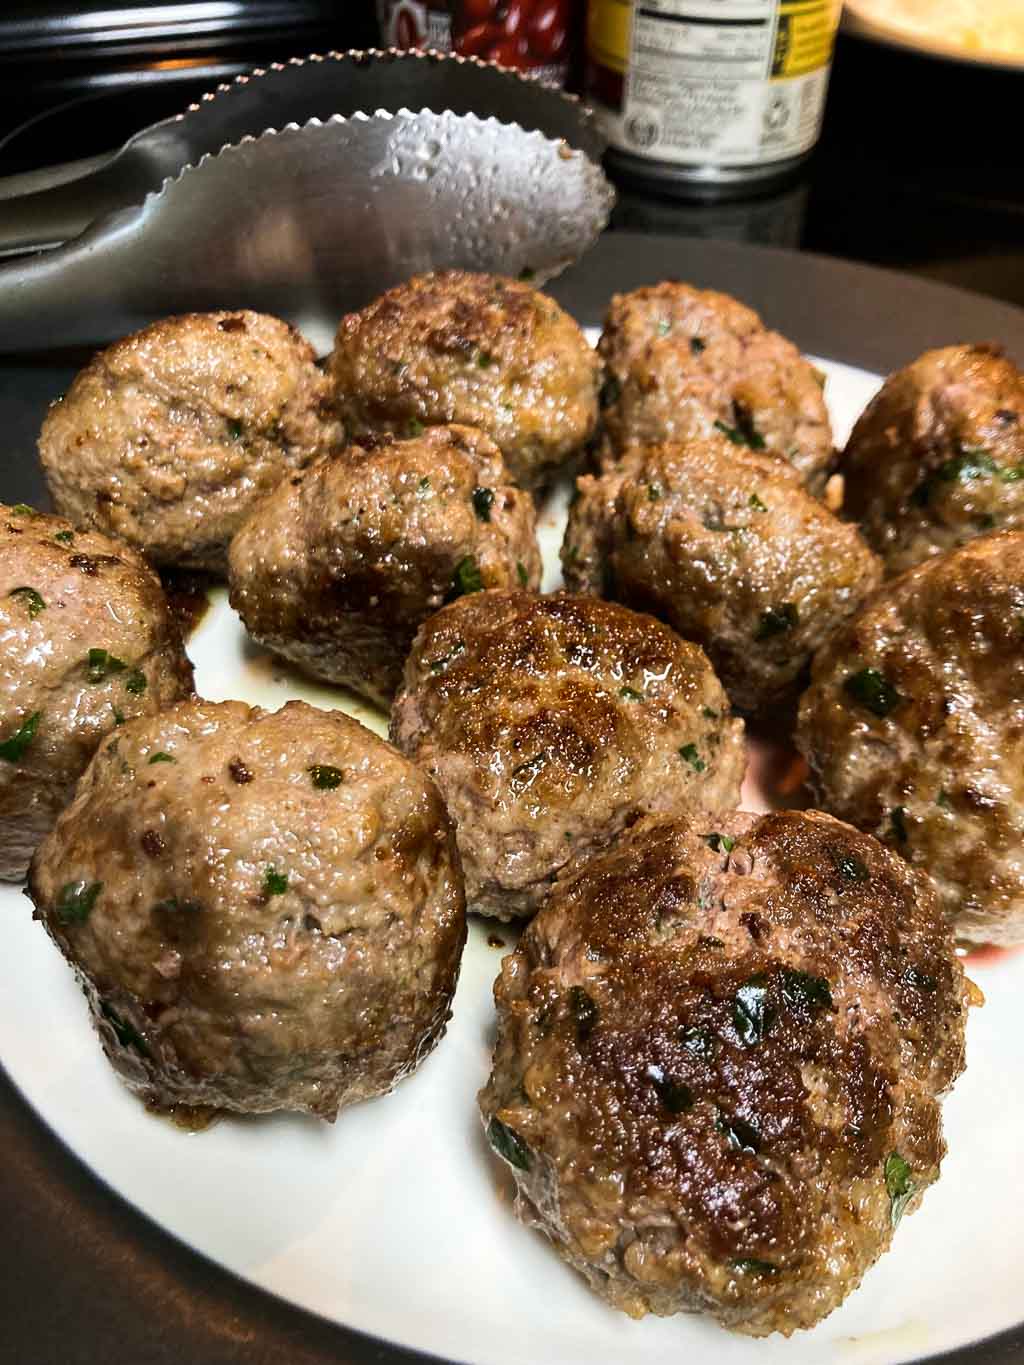 Bison meatballs with parsley cooked on a plate